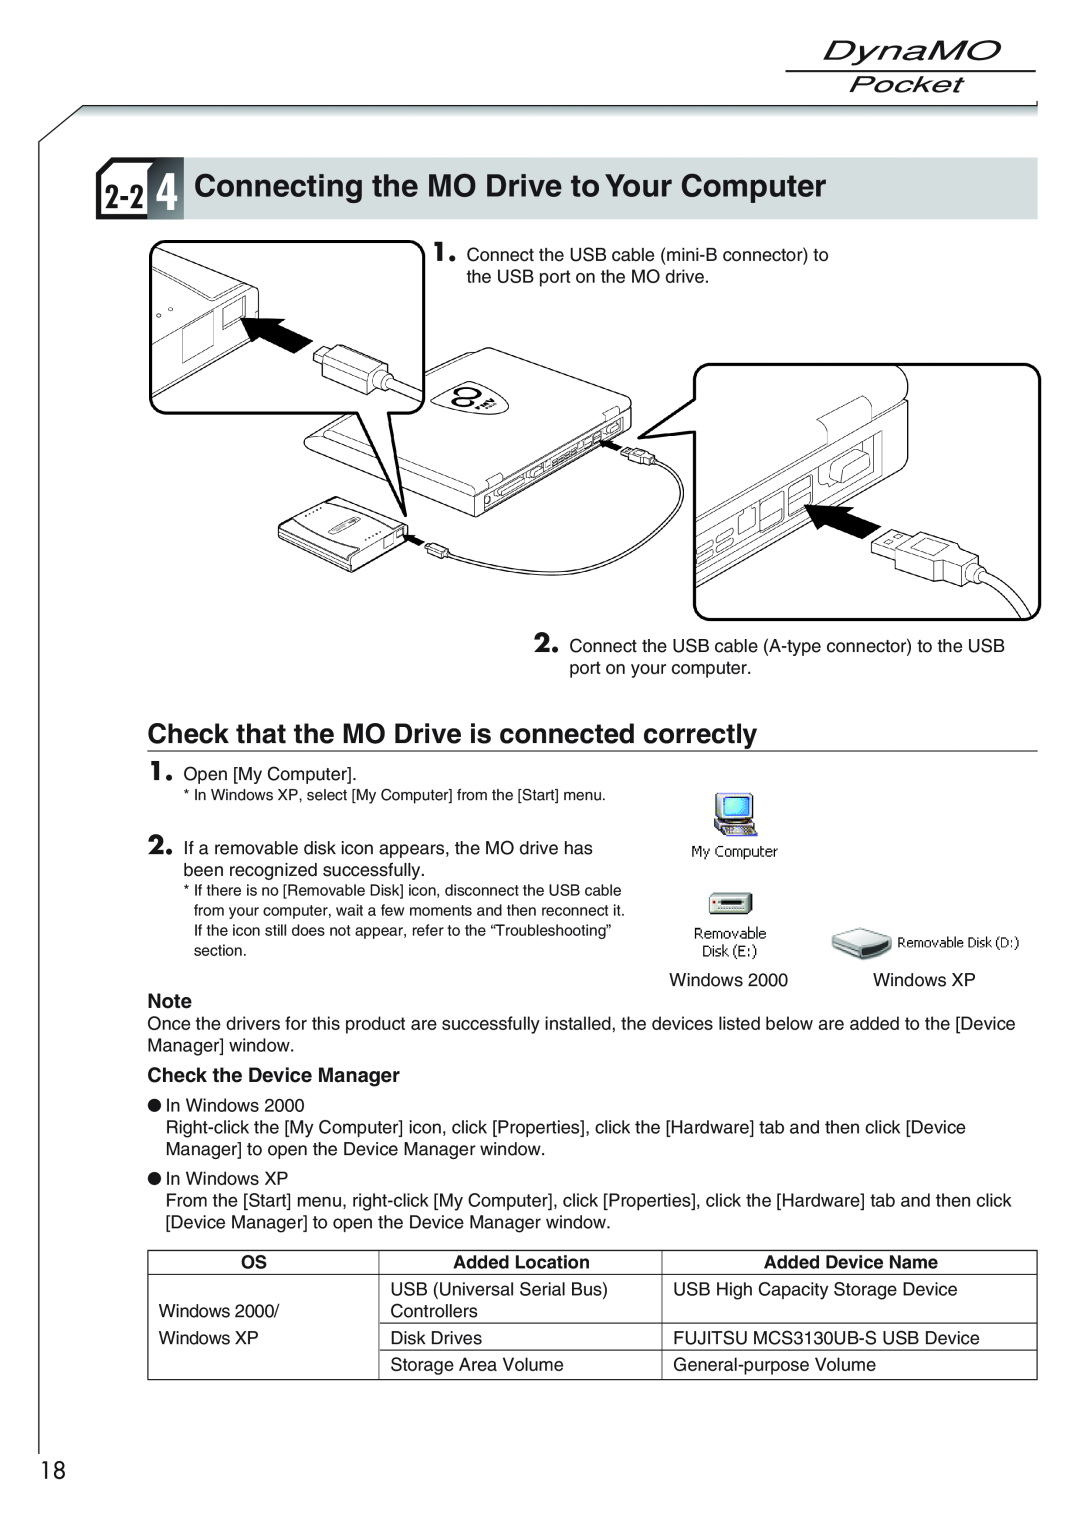 Fujitsu 1300U2 user manual 2-2 4 Connecting the MO Drive to Your Computer, Check that the MO Drive is connected correctly 